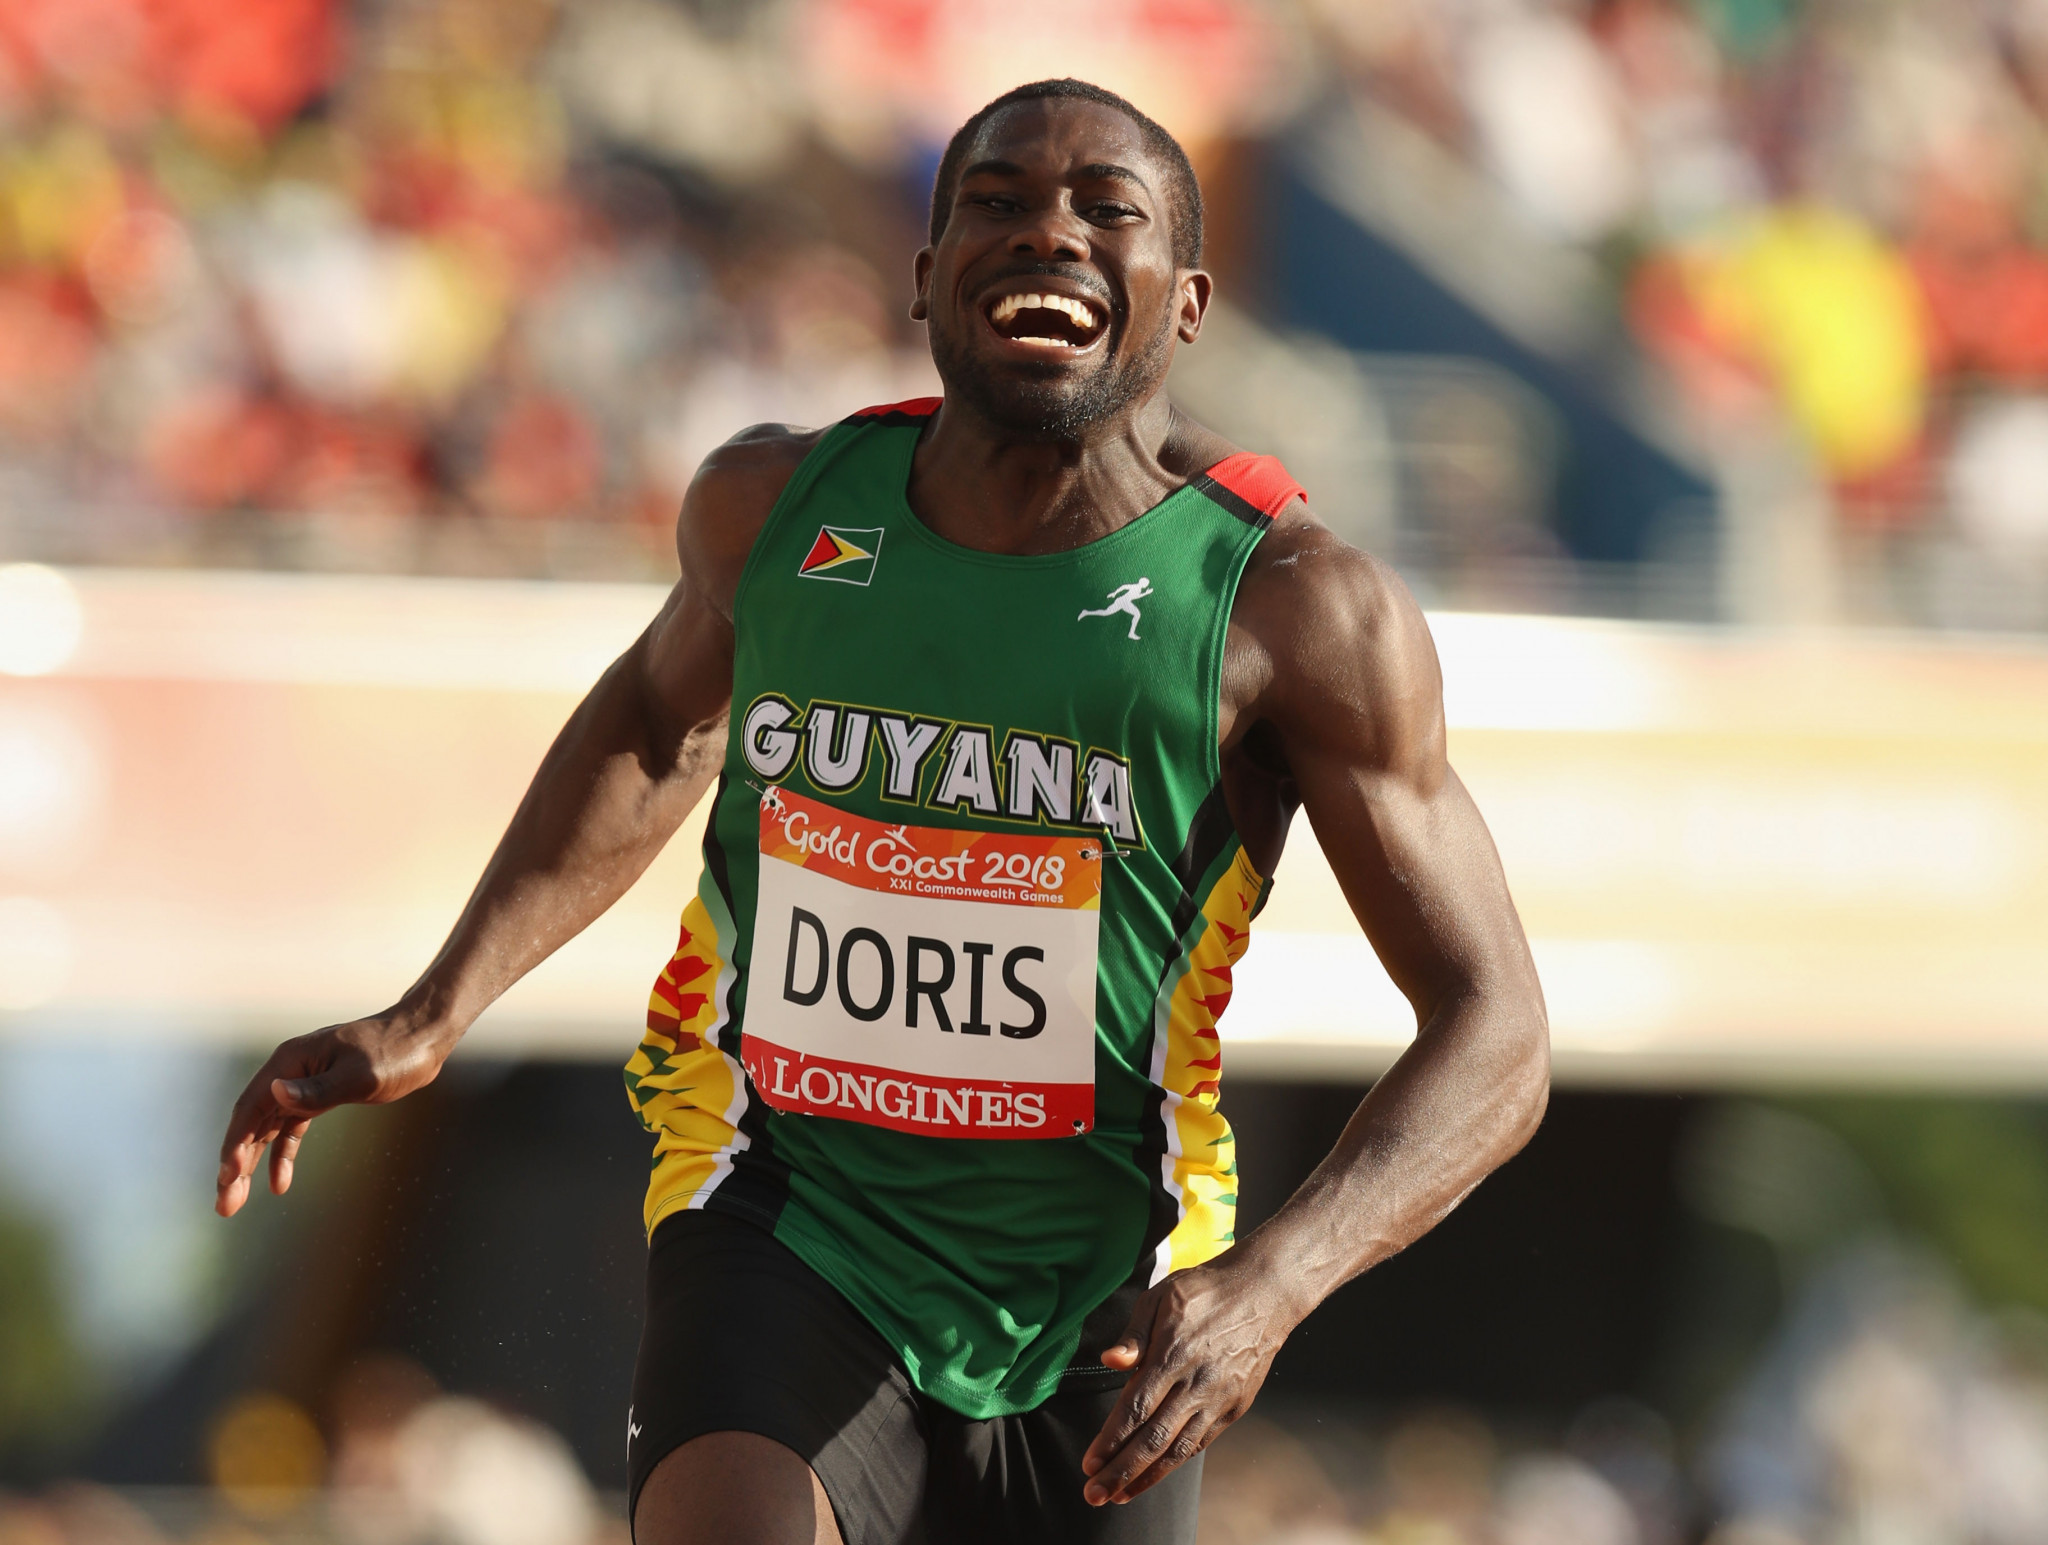 Troy Doris won triple jump gold for Guyana at Gold Coast 2018 ©Getty Images